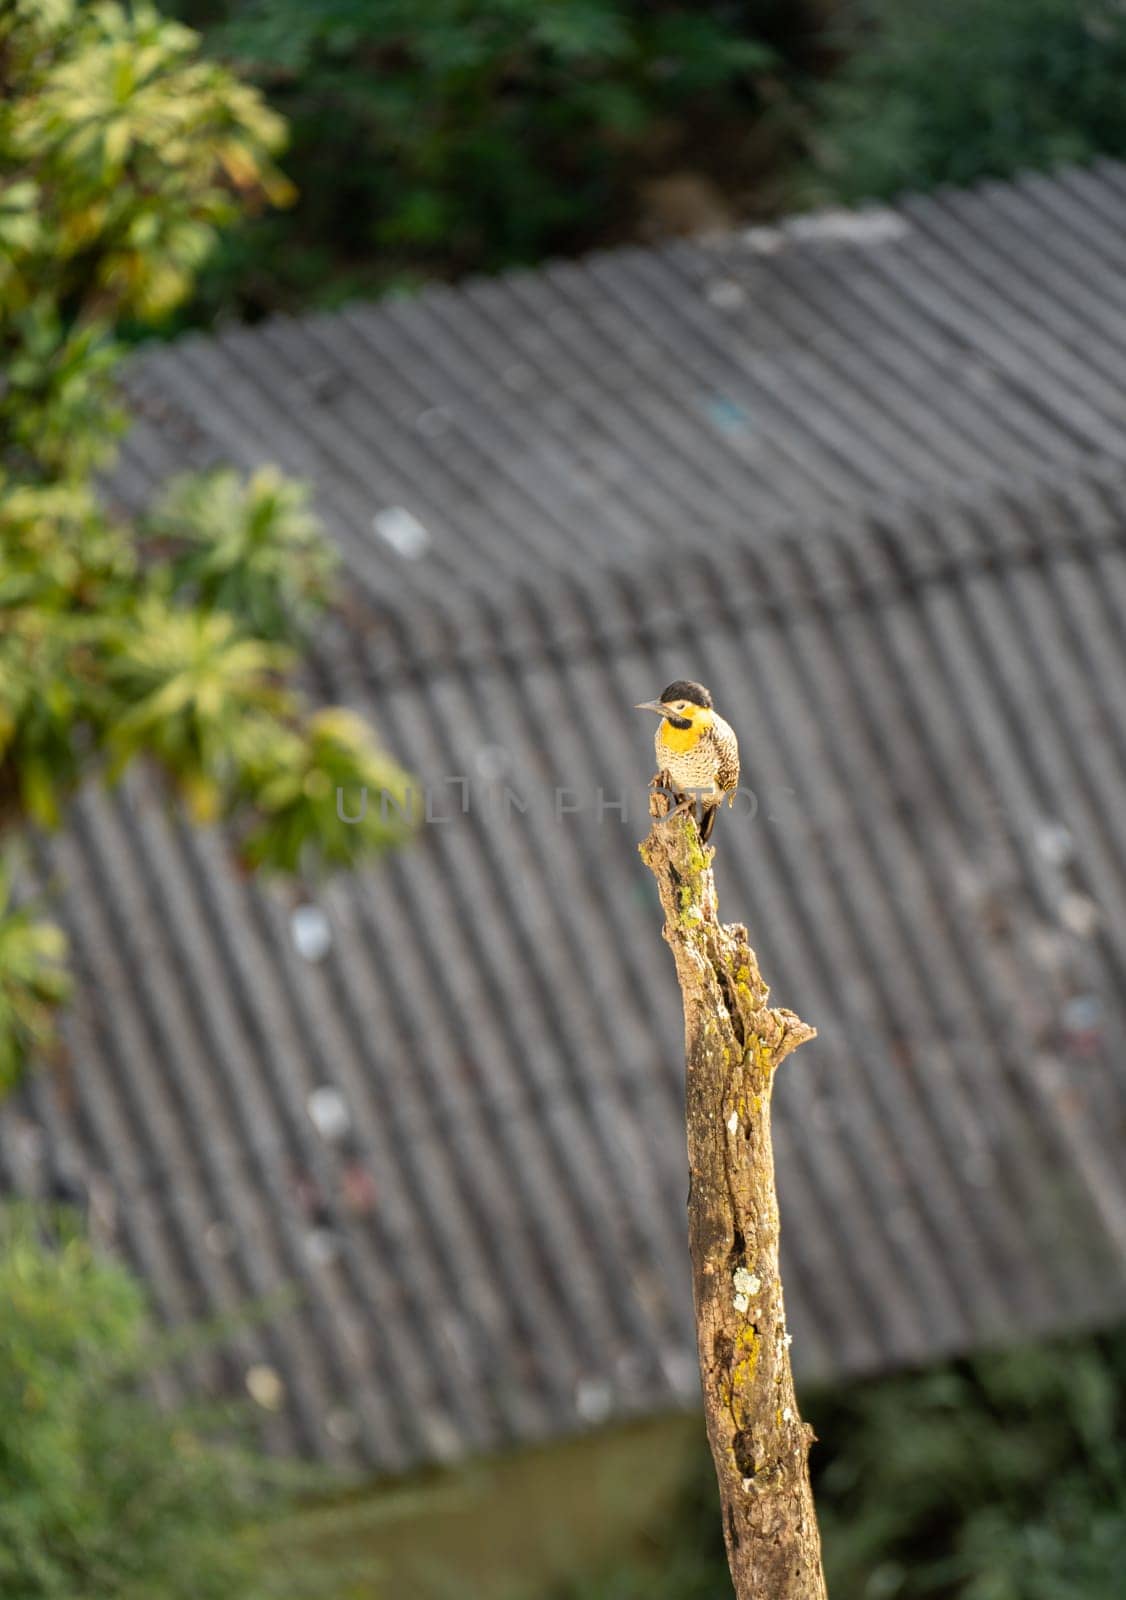 A woodpecker with yellow and black feathers perches on a dry tree trunk, blending into the urban surroundings with a blurry corrugated roof in the background.